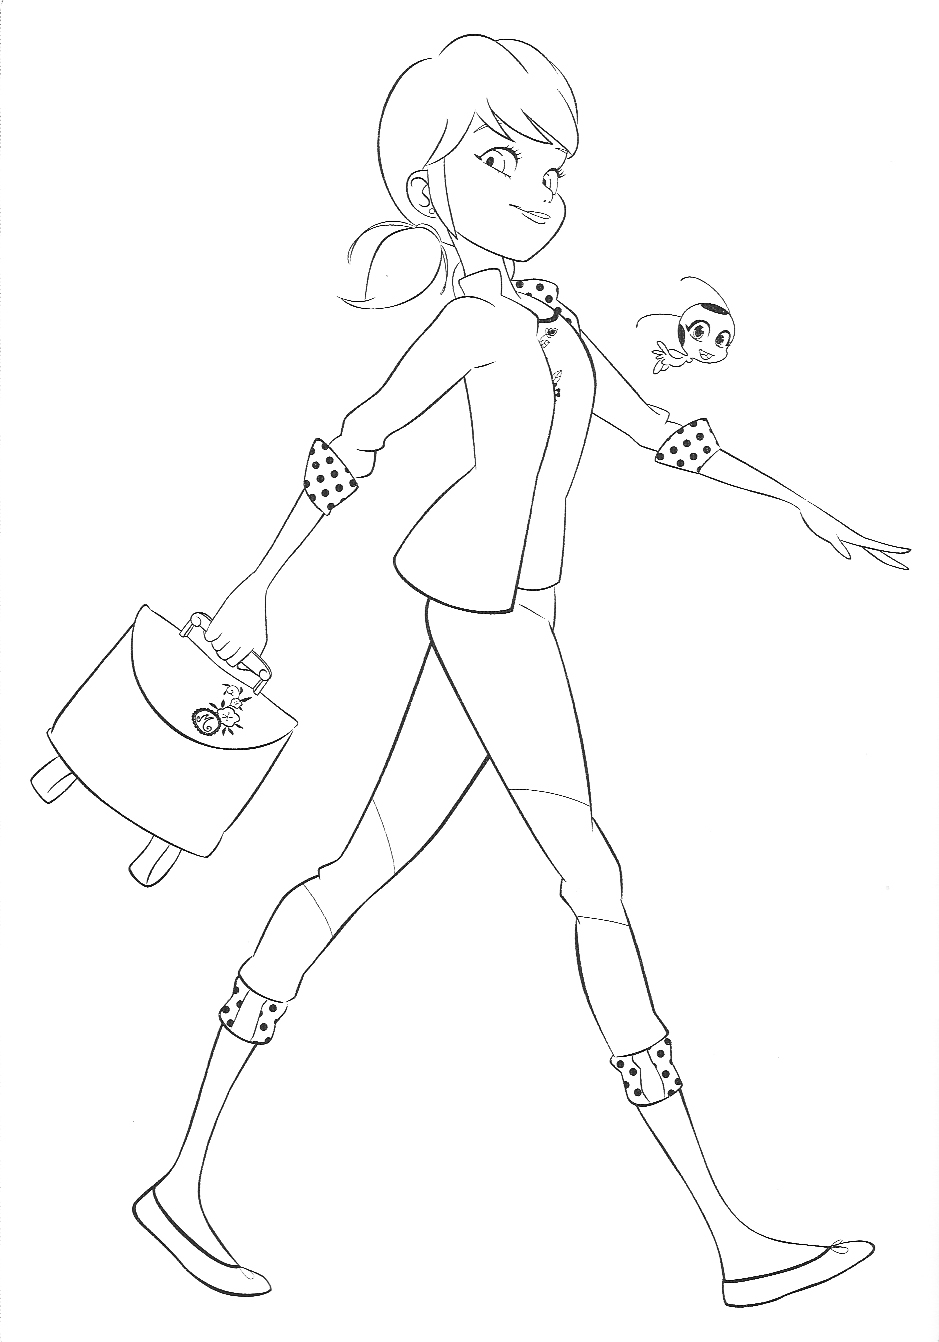 Miraculous Ladybug coloring pages with Marinette - YouLoveIt.com